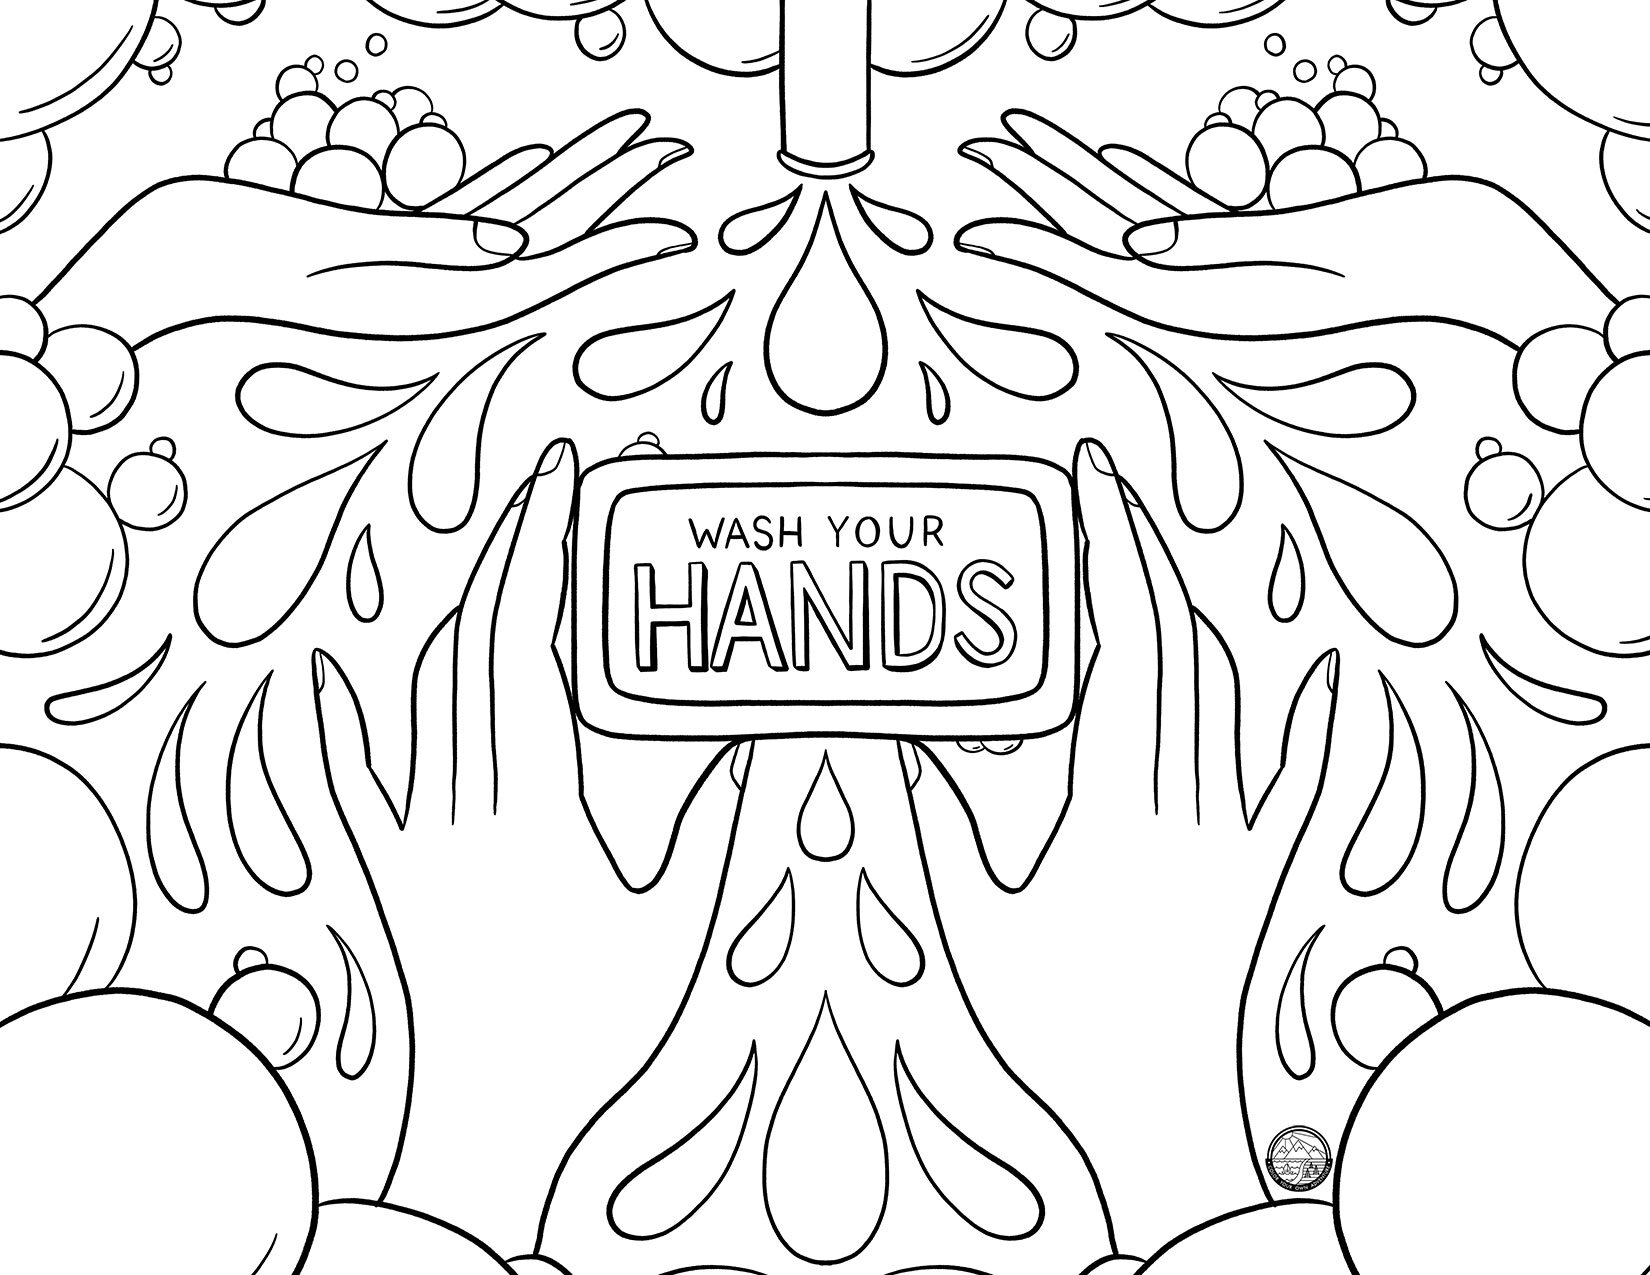 Wash Your Hand Coloring Page.jpg